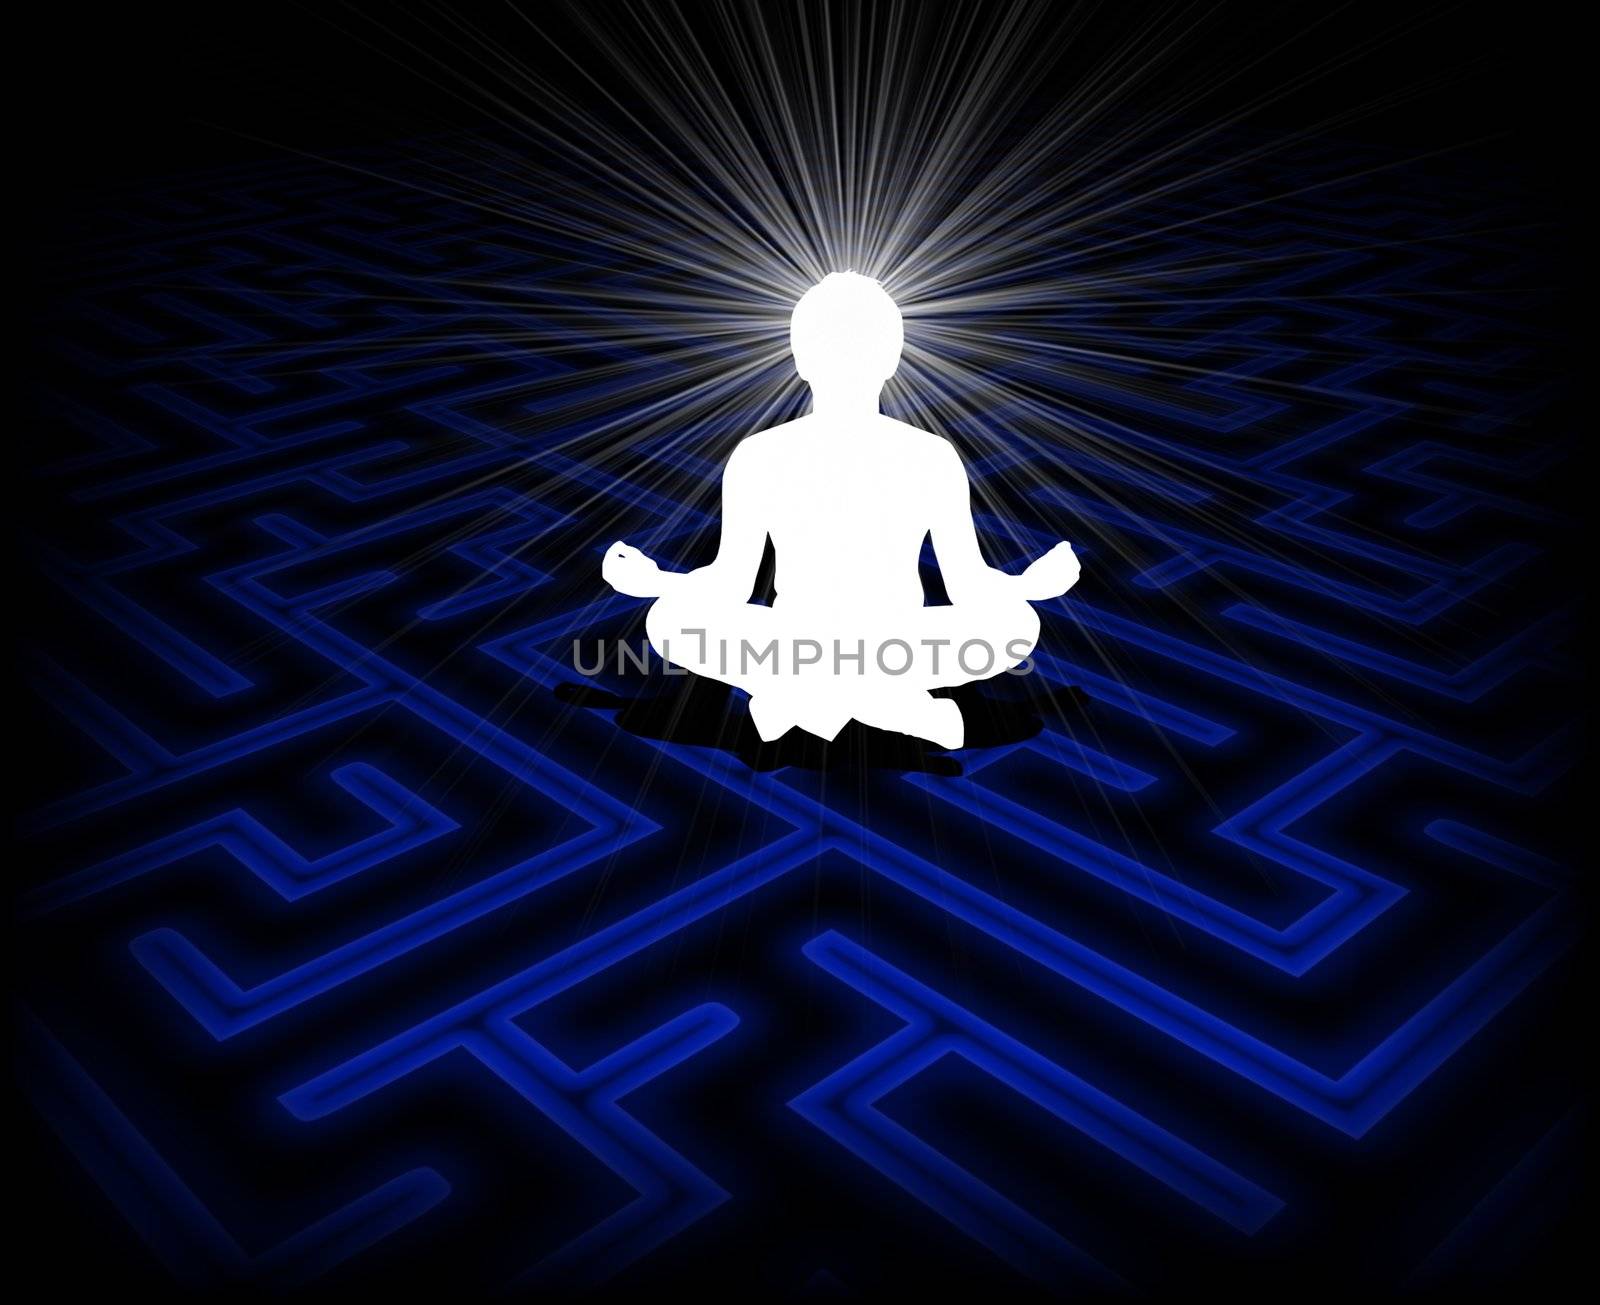 Illustration of a person meditating over a maze background